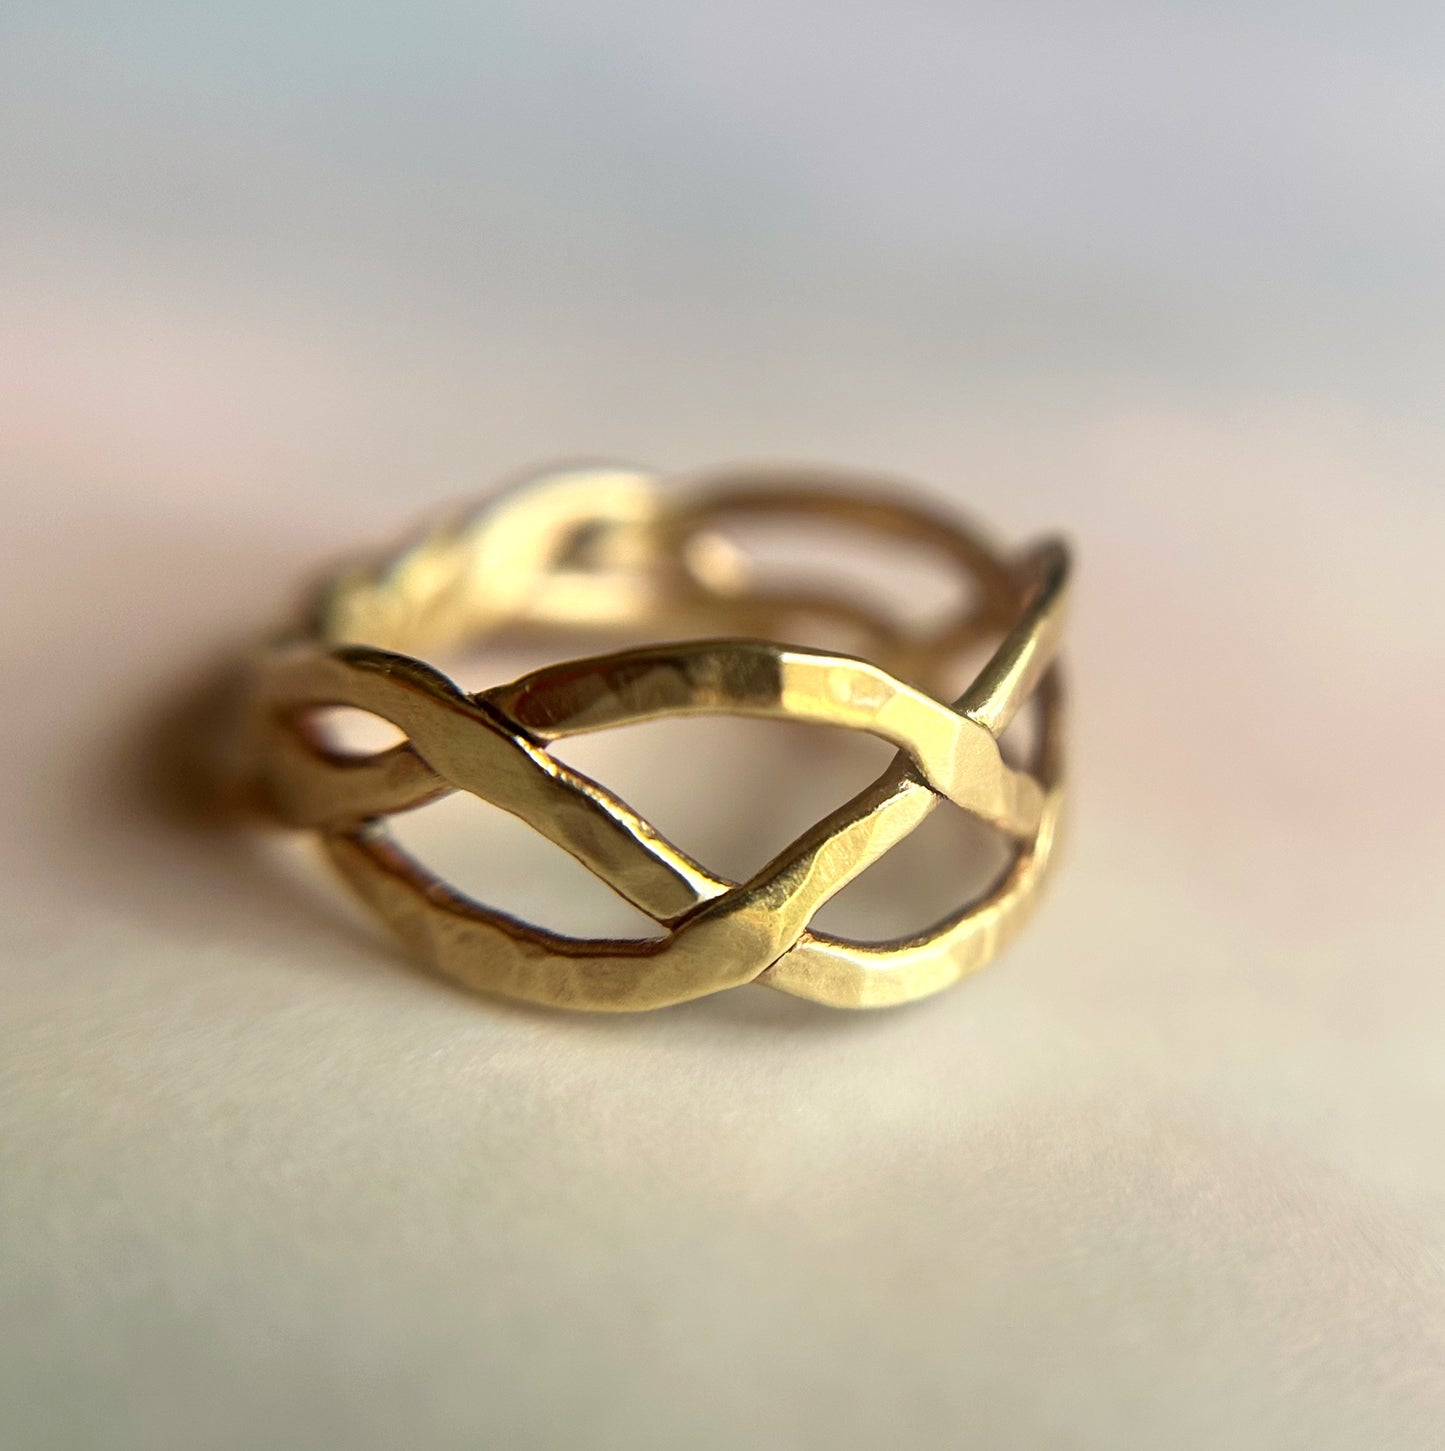 Woven Ring in Gold or Silver